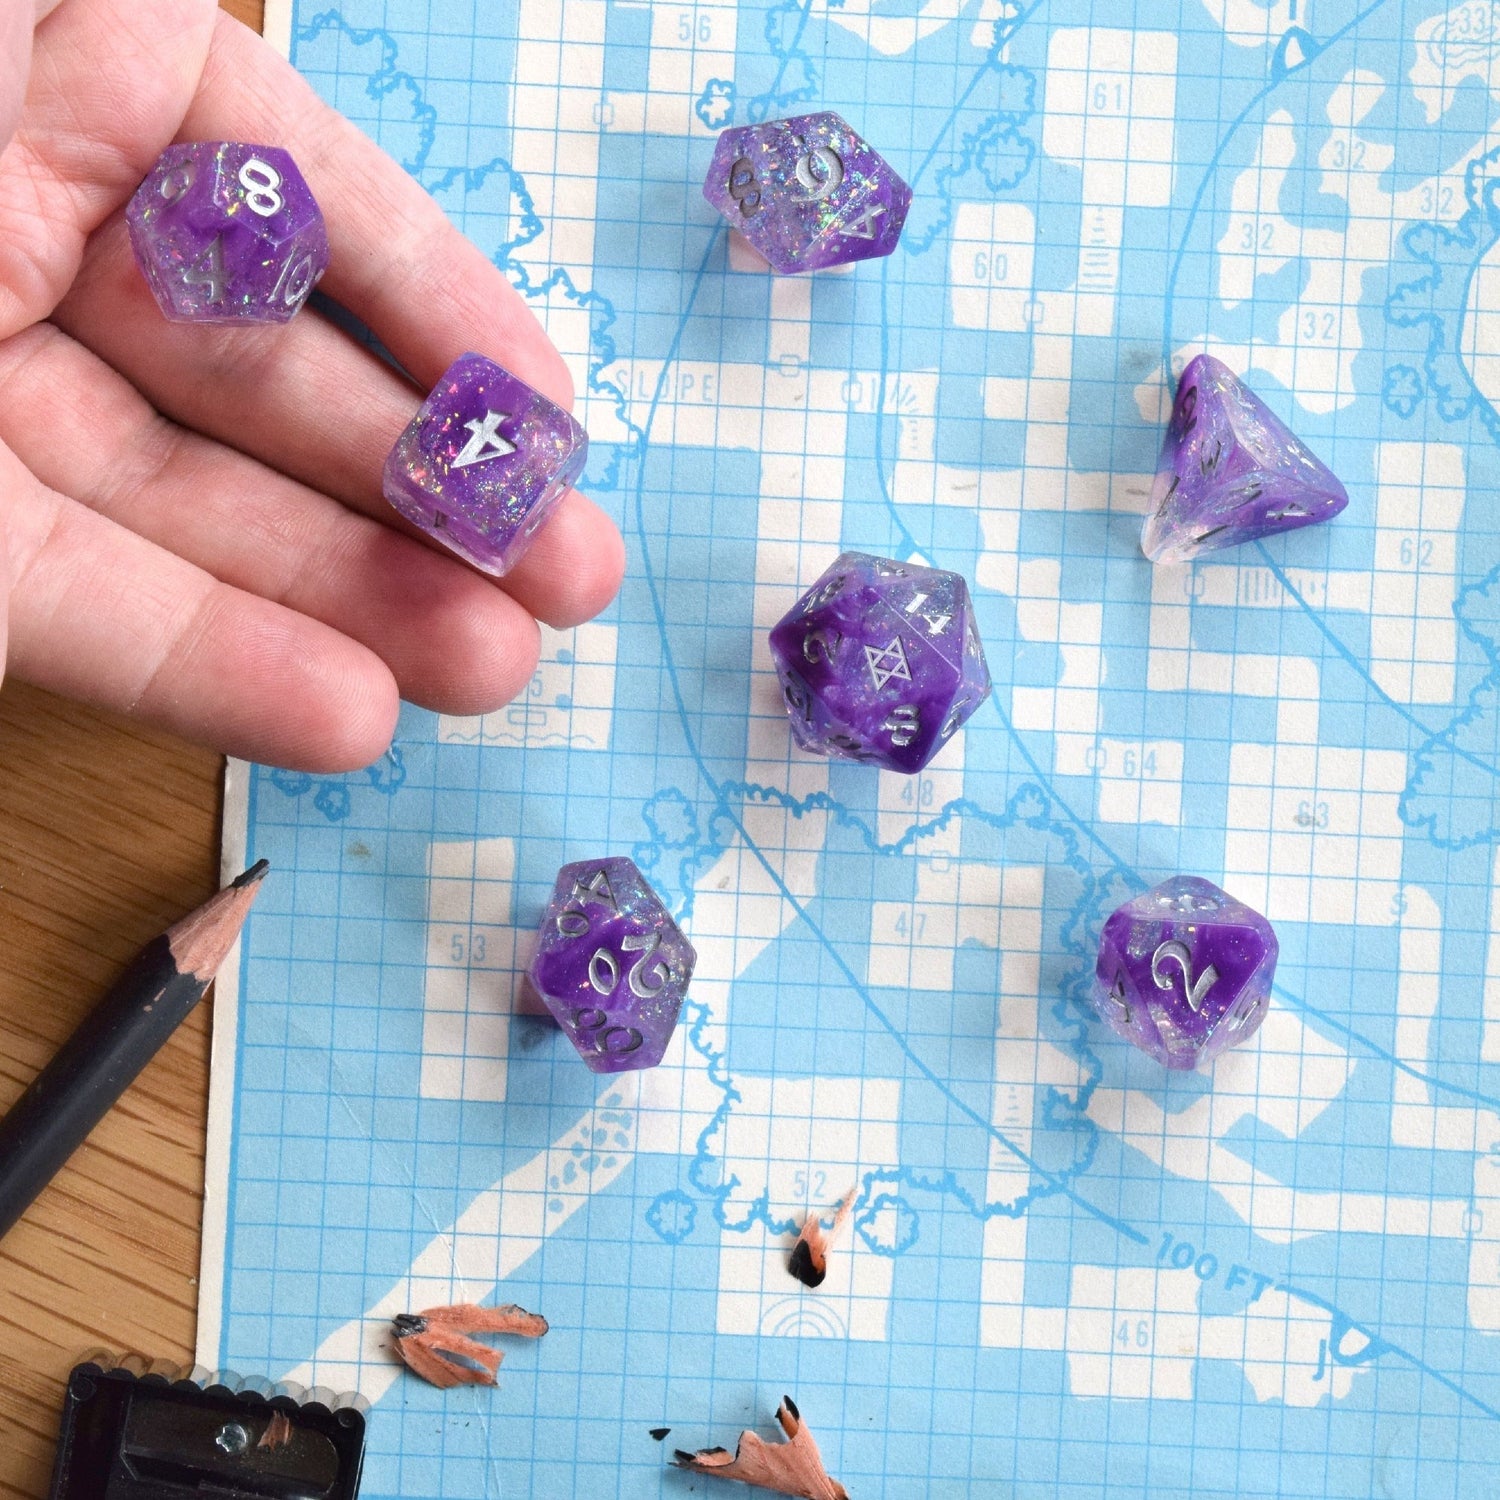 Image of a seven dice set: a D4, D6, D8, D10, D12, D20, and D100. The dice have a galaxy swirl inside them of dark purple, light purple, and clear with iridescent glitter flakes. The numbers are painted silver. The D20 has the BoB logo on the 20 side. This scene shows them being rolled on a graph paper RPG map.